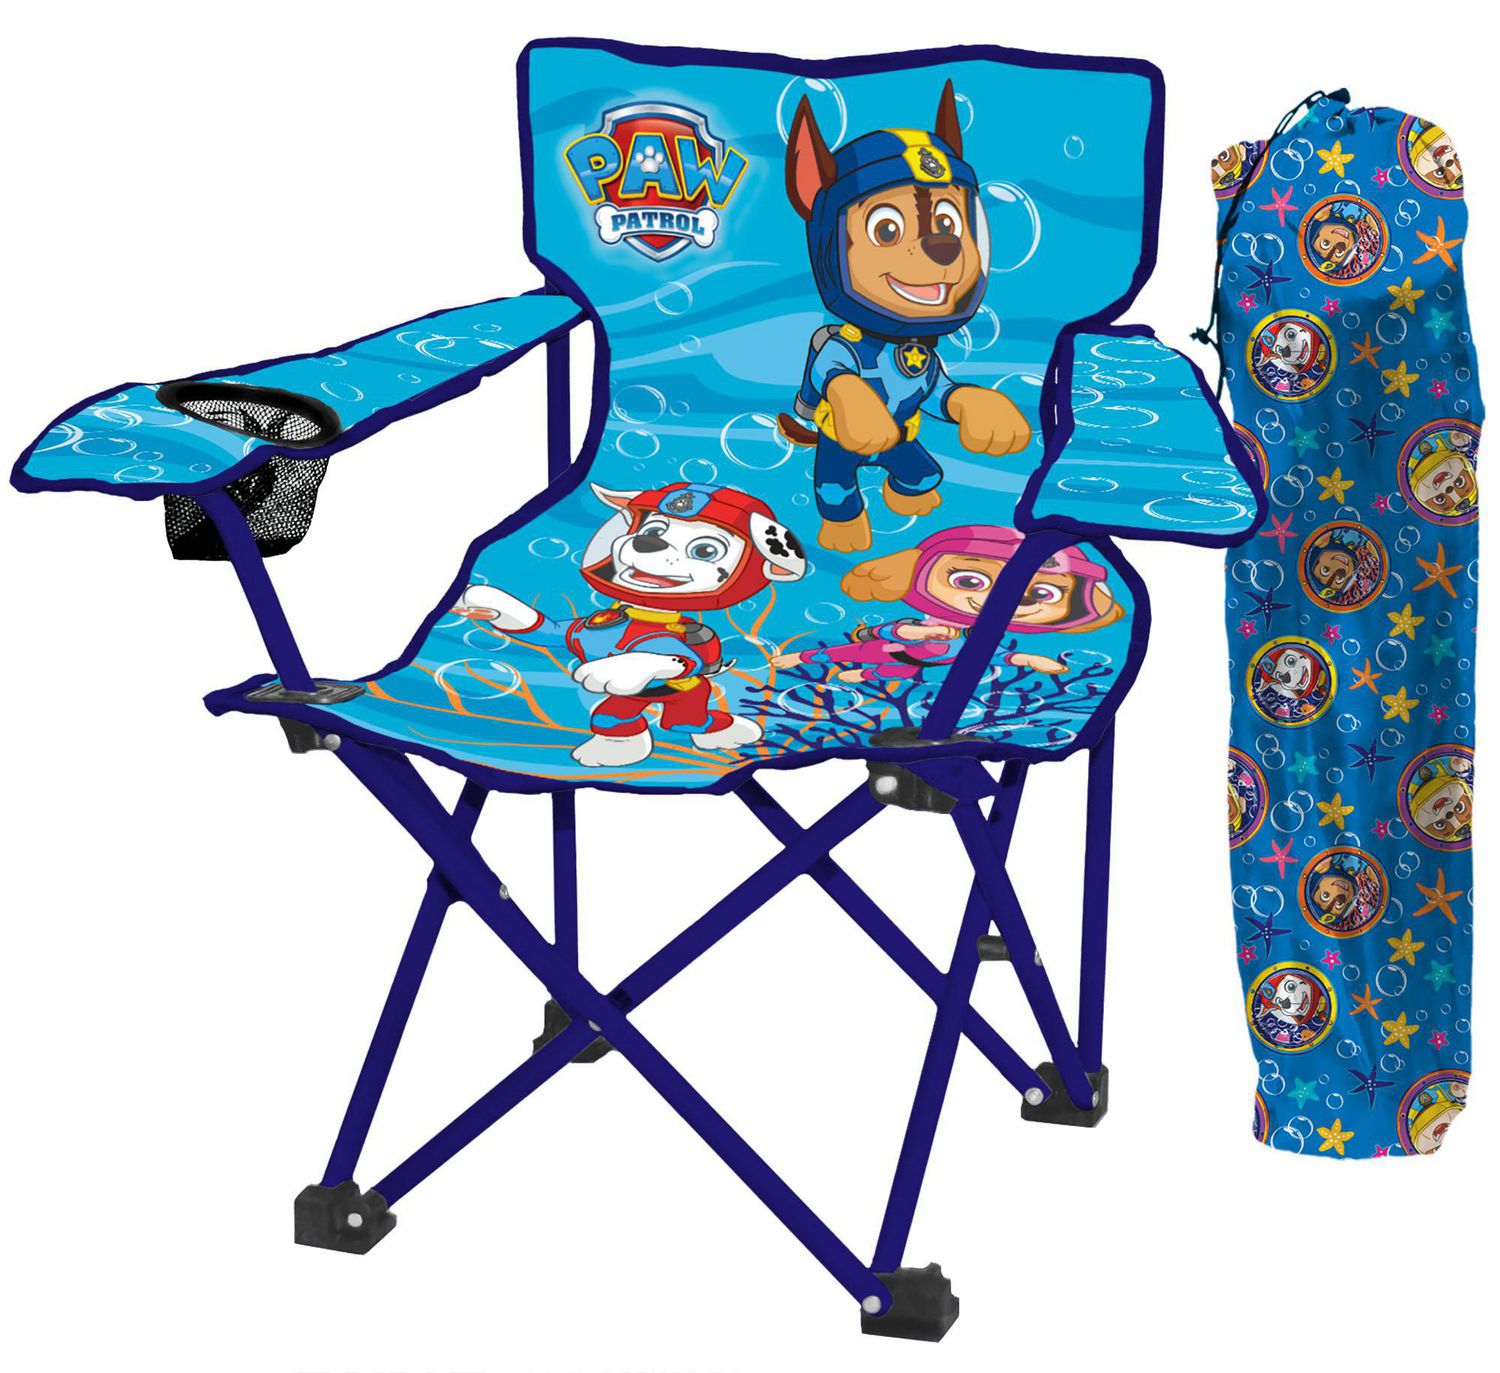 PAW Patrol Folding Camp Chair with Tote | Walmart Canada